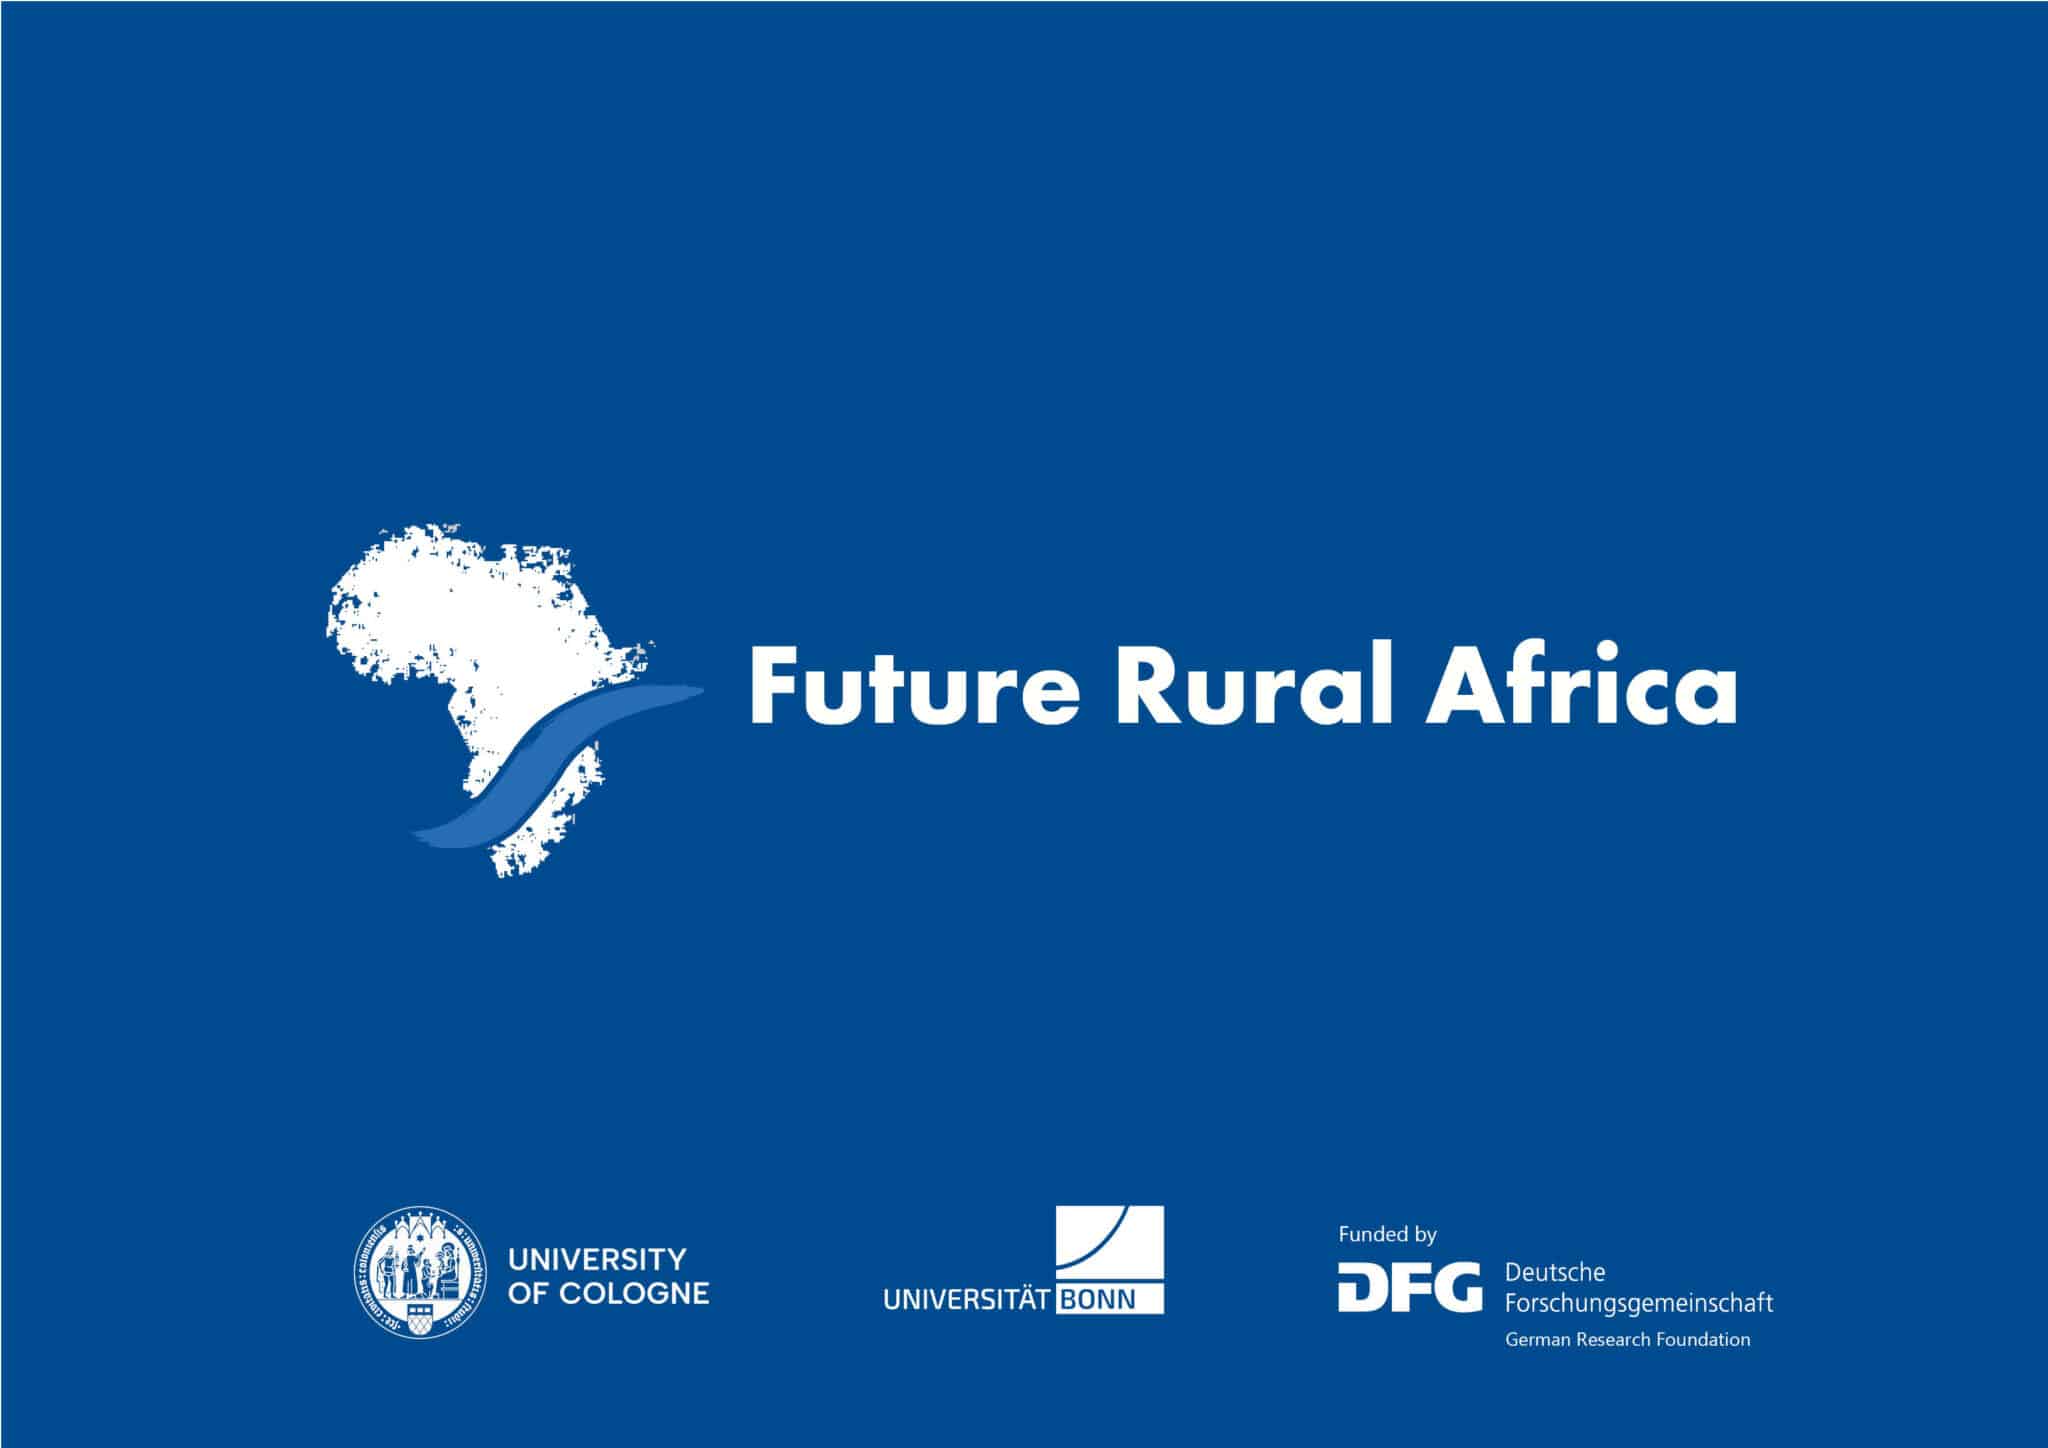 Cover Image with the Logos of the CRC "Future Rural Africa"